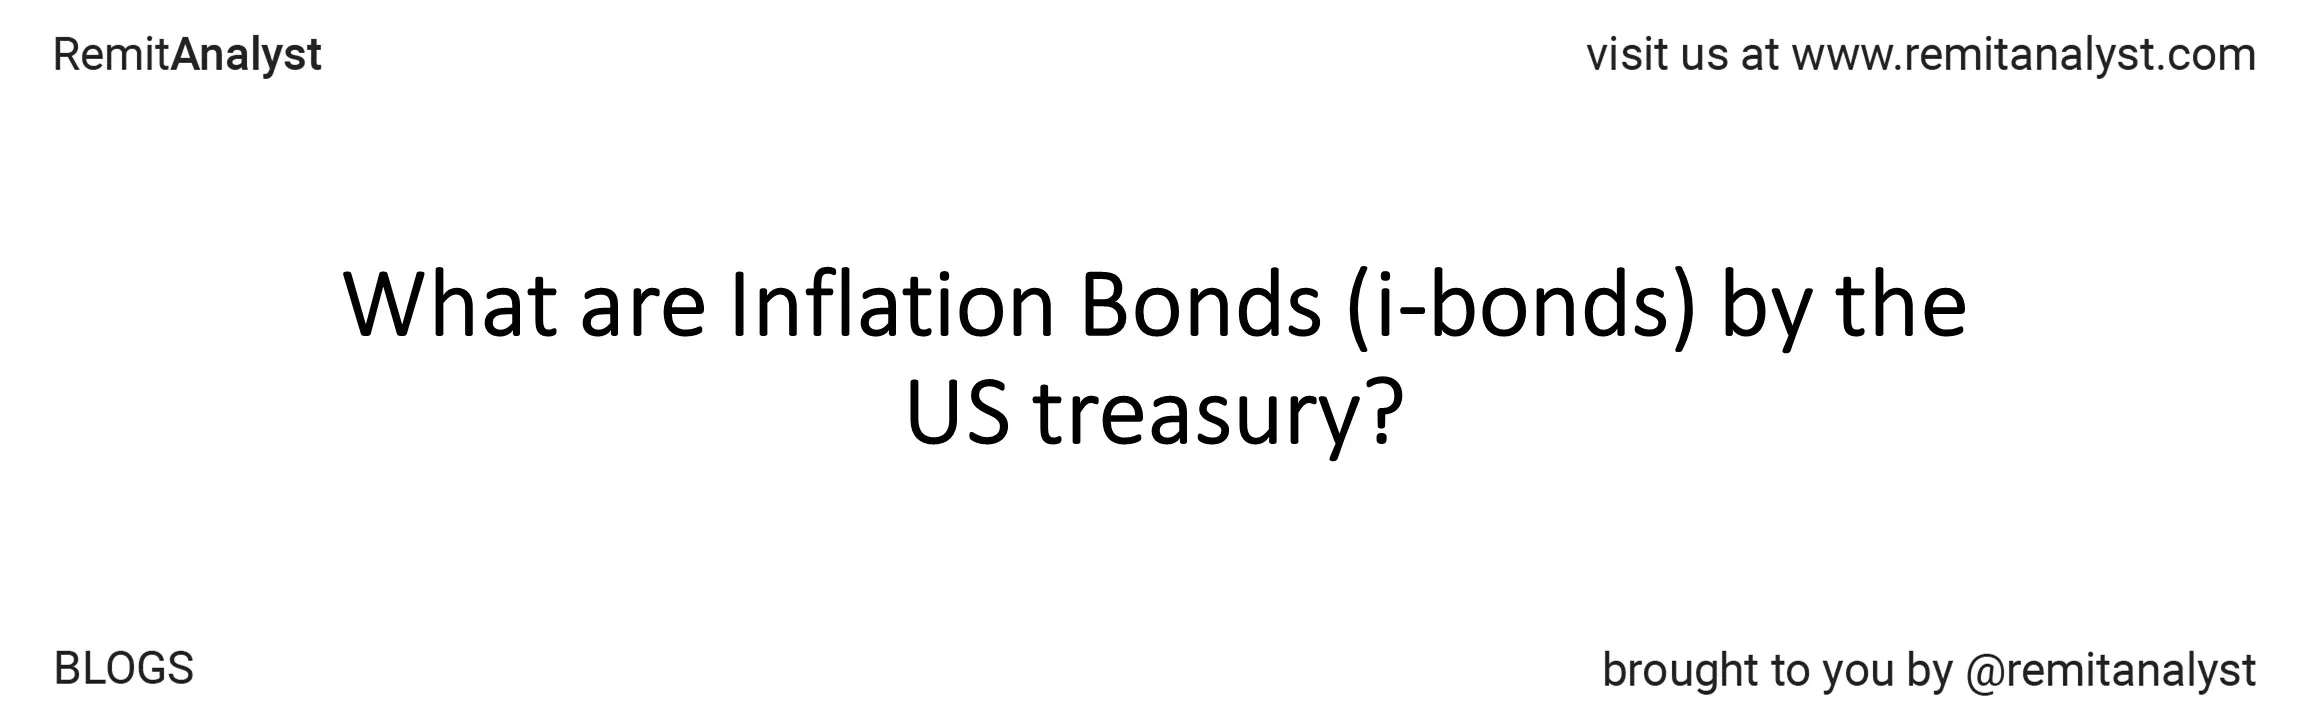 buying-series-i-inflation-bonds-title